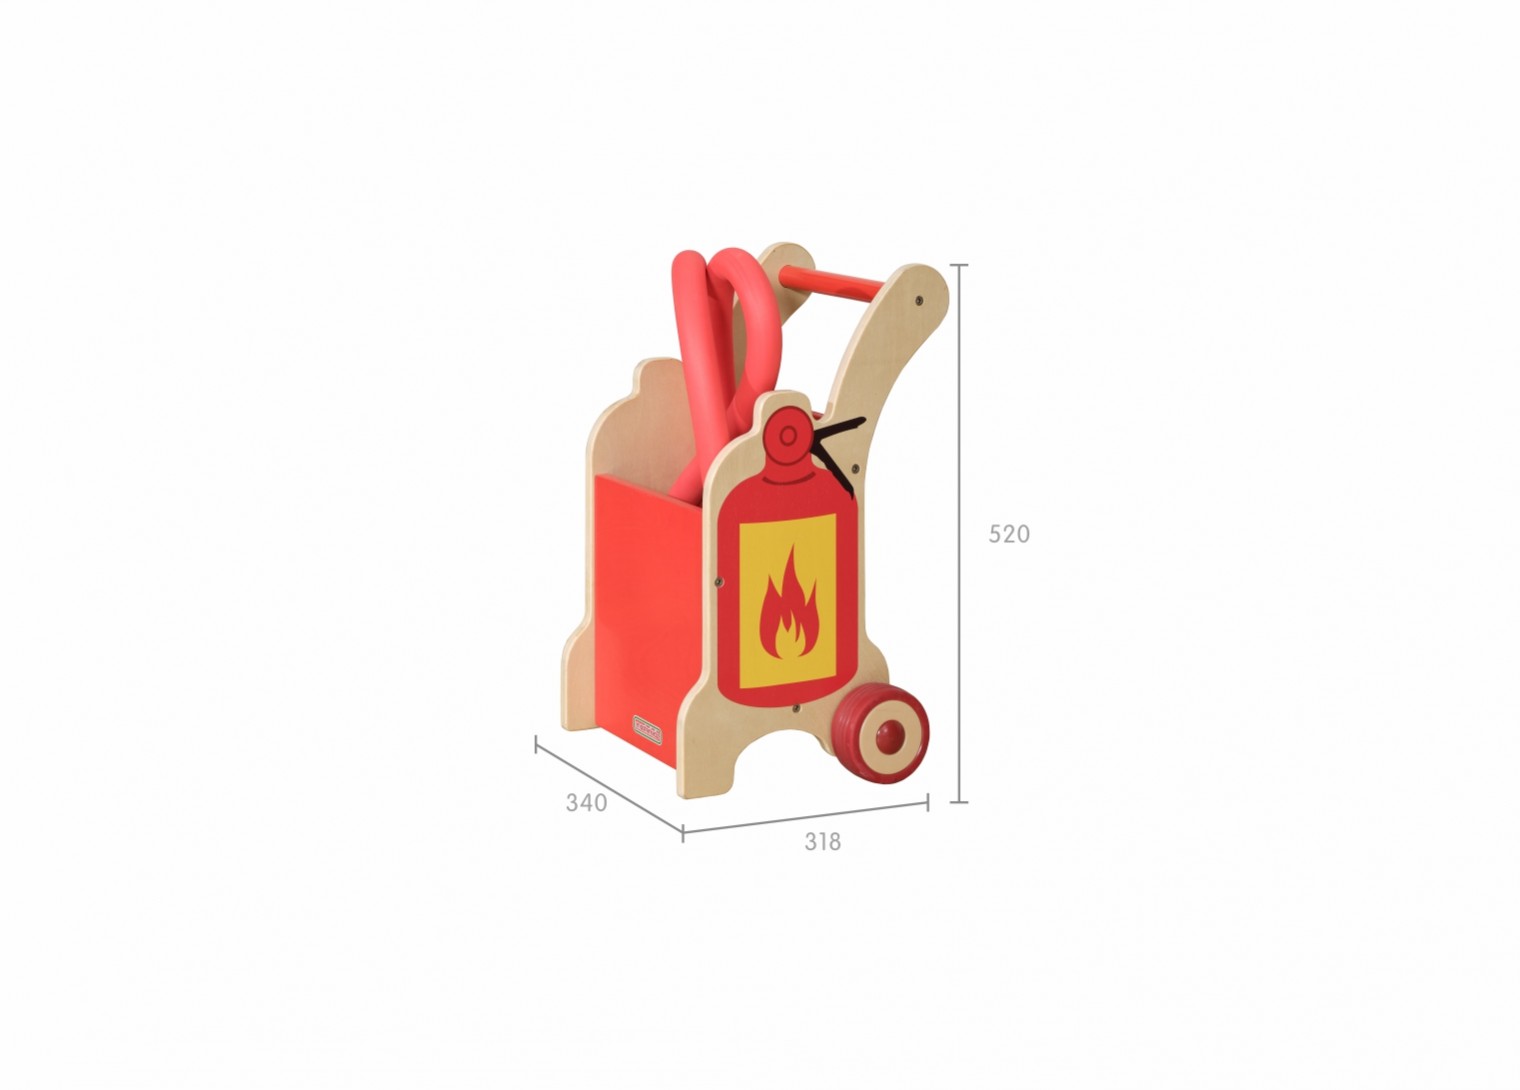 Mobile Fire Extinguisher